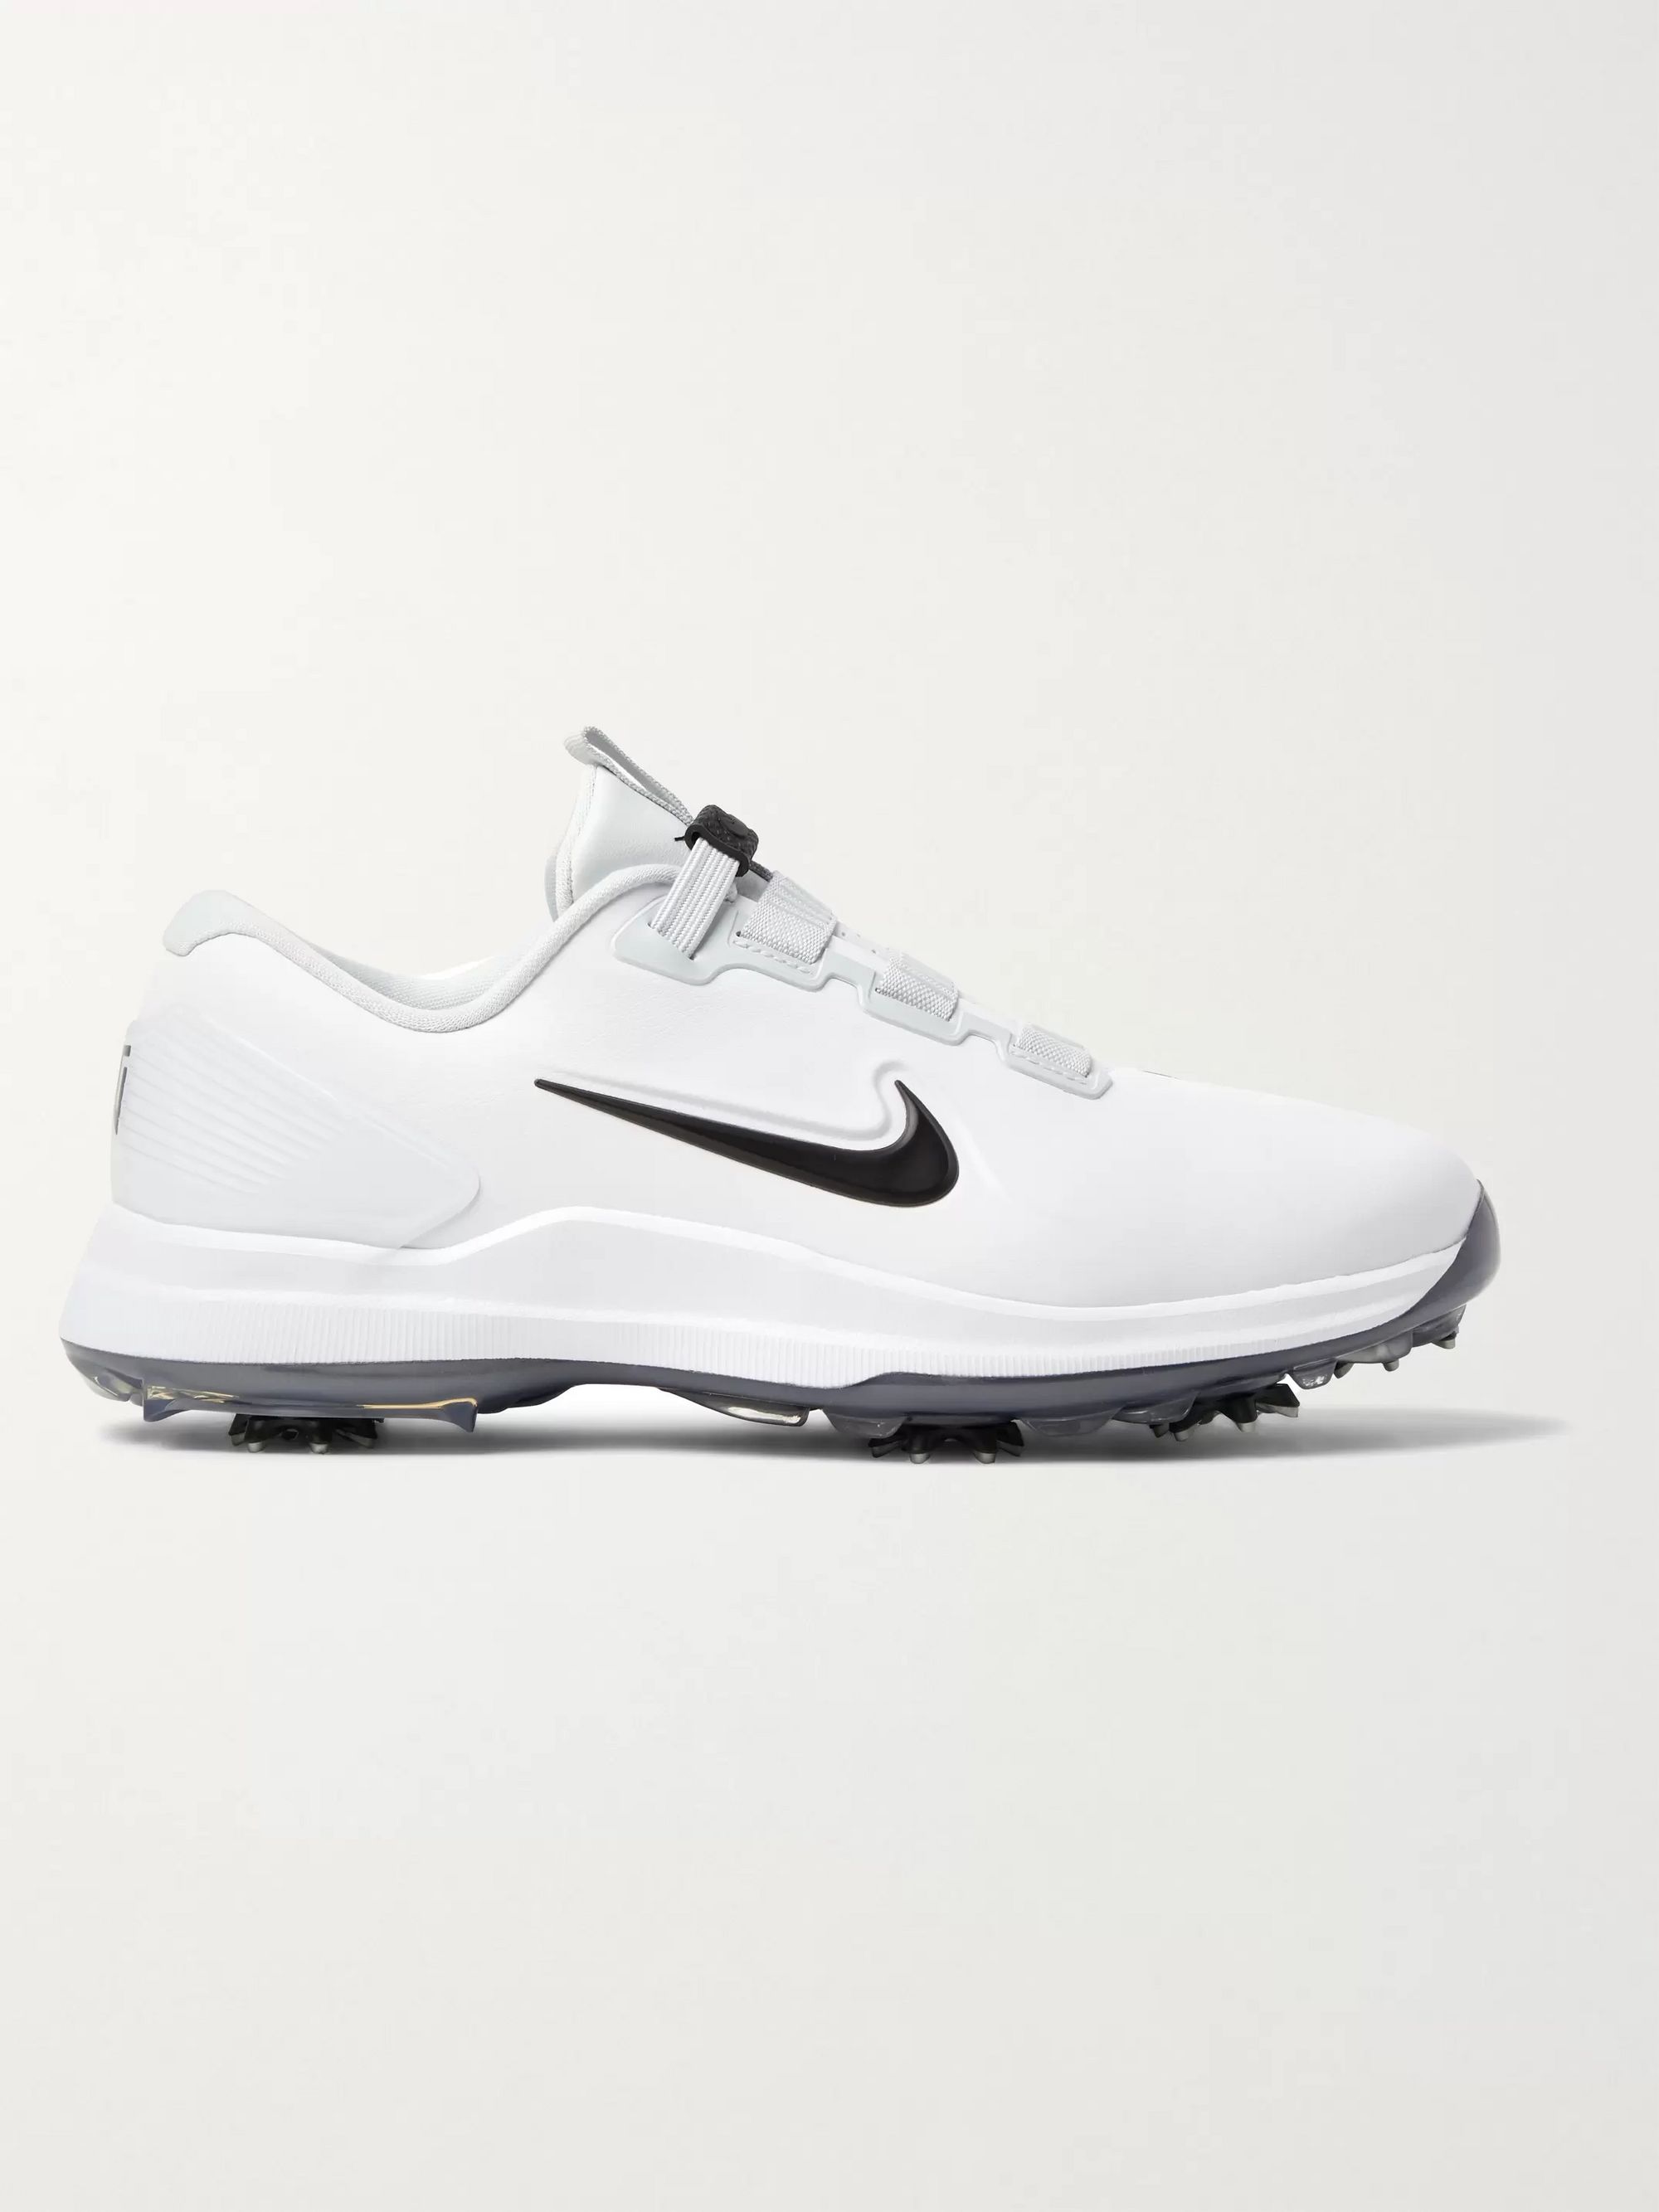 tiger woods golf shoes 2019